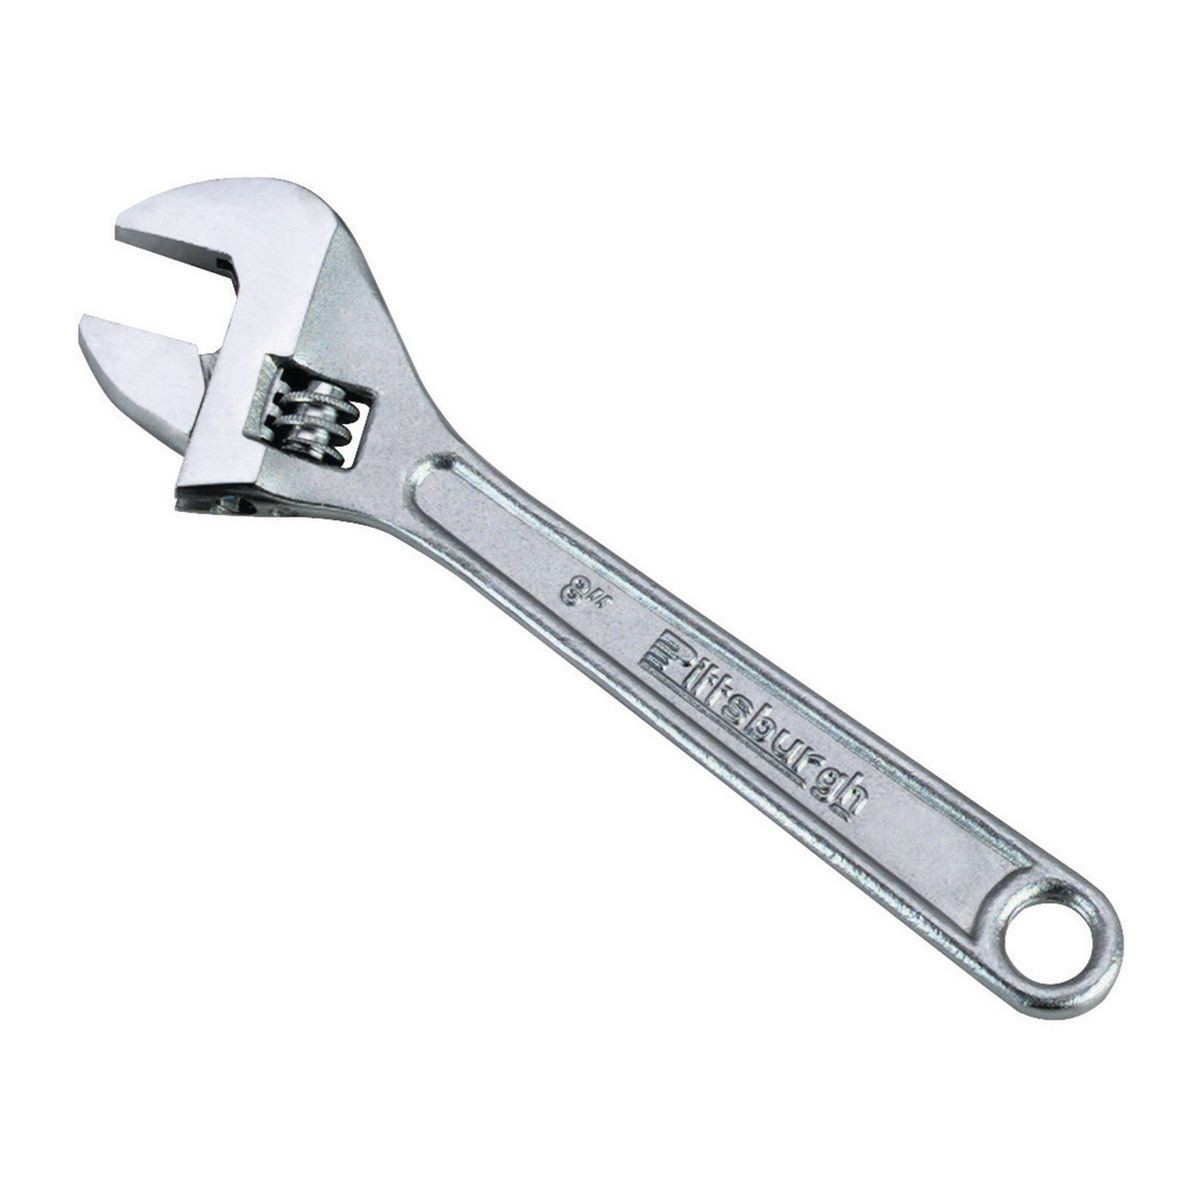 PITTSBURGH 8 in. Steel Adjustable Wrench - Item 67150 / 60709 / 63719 / 69556